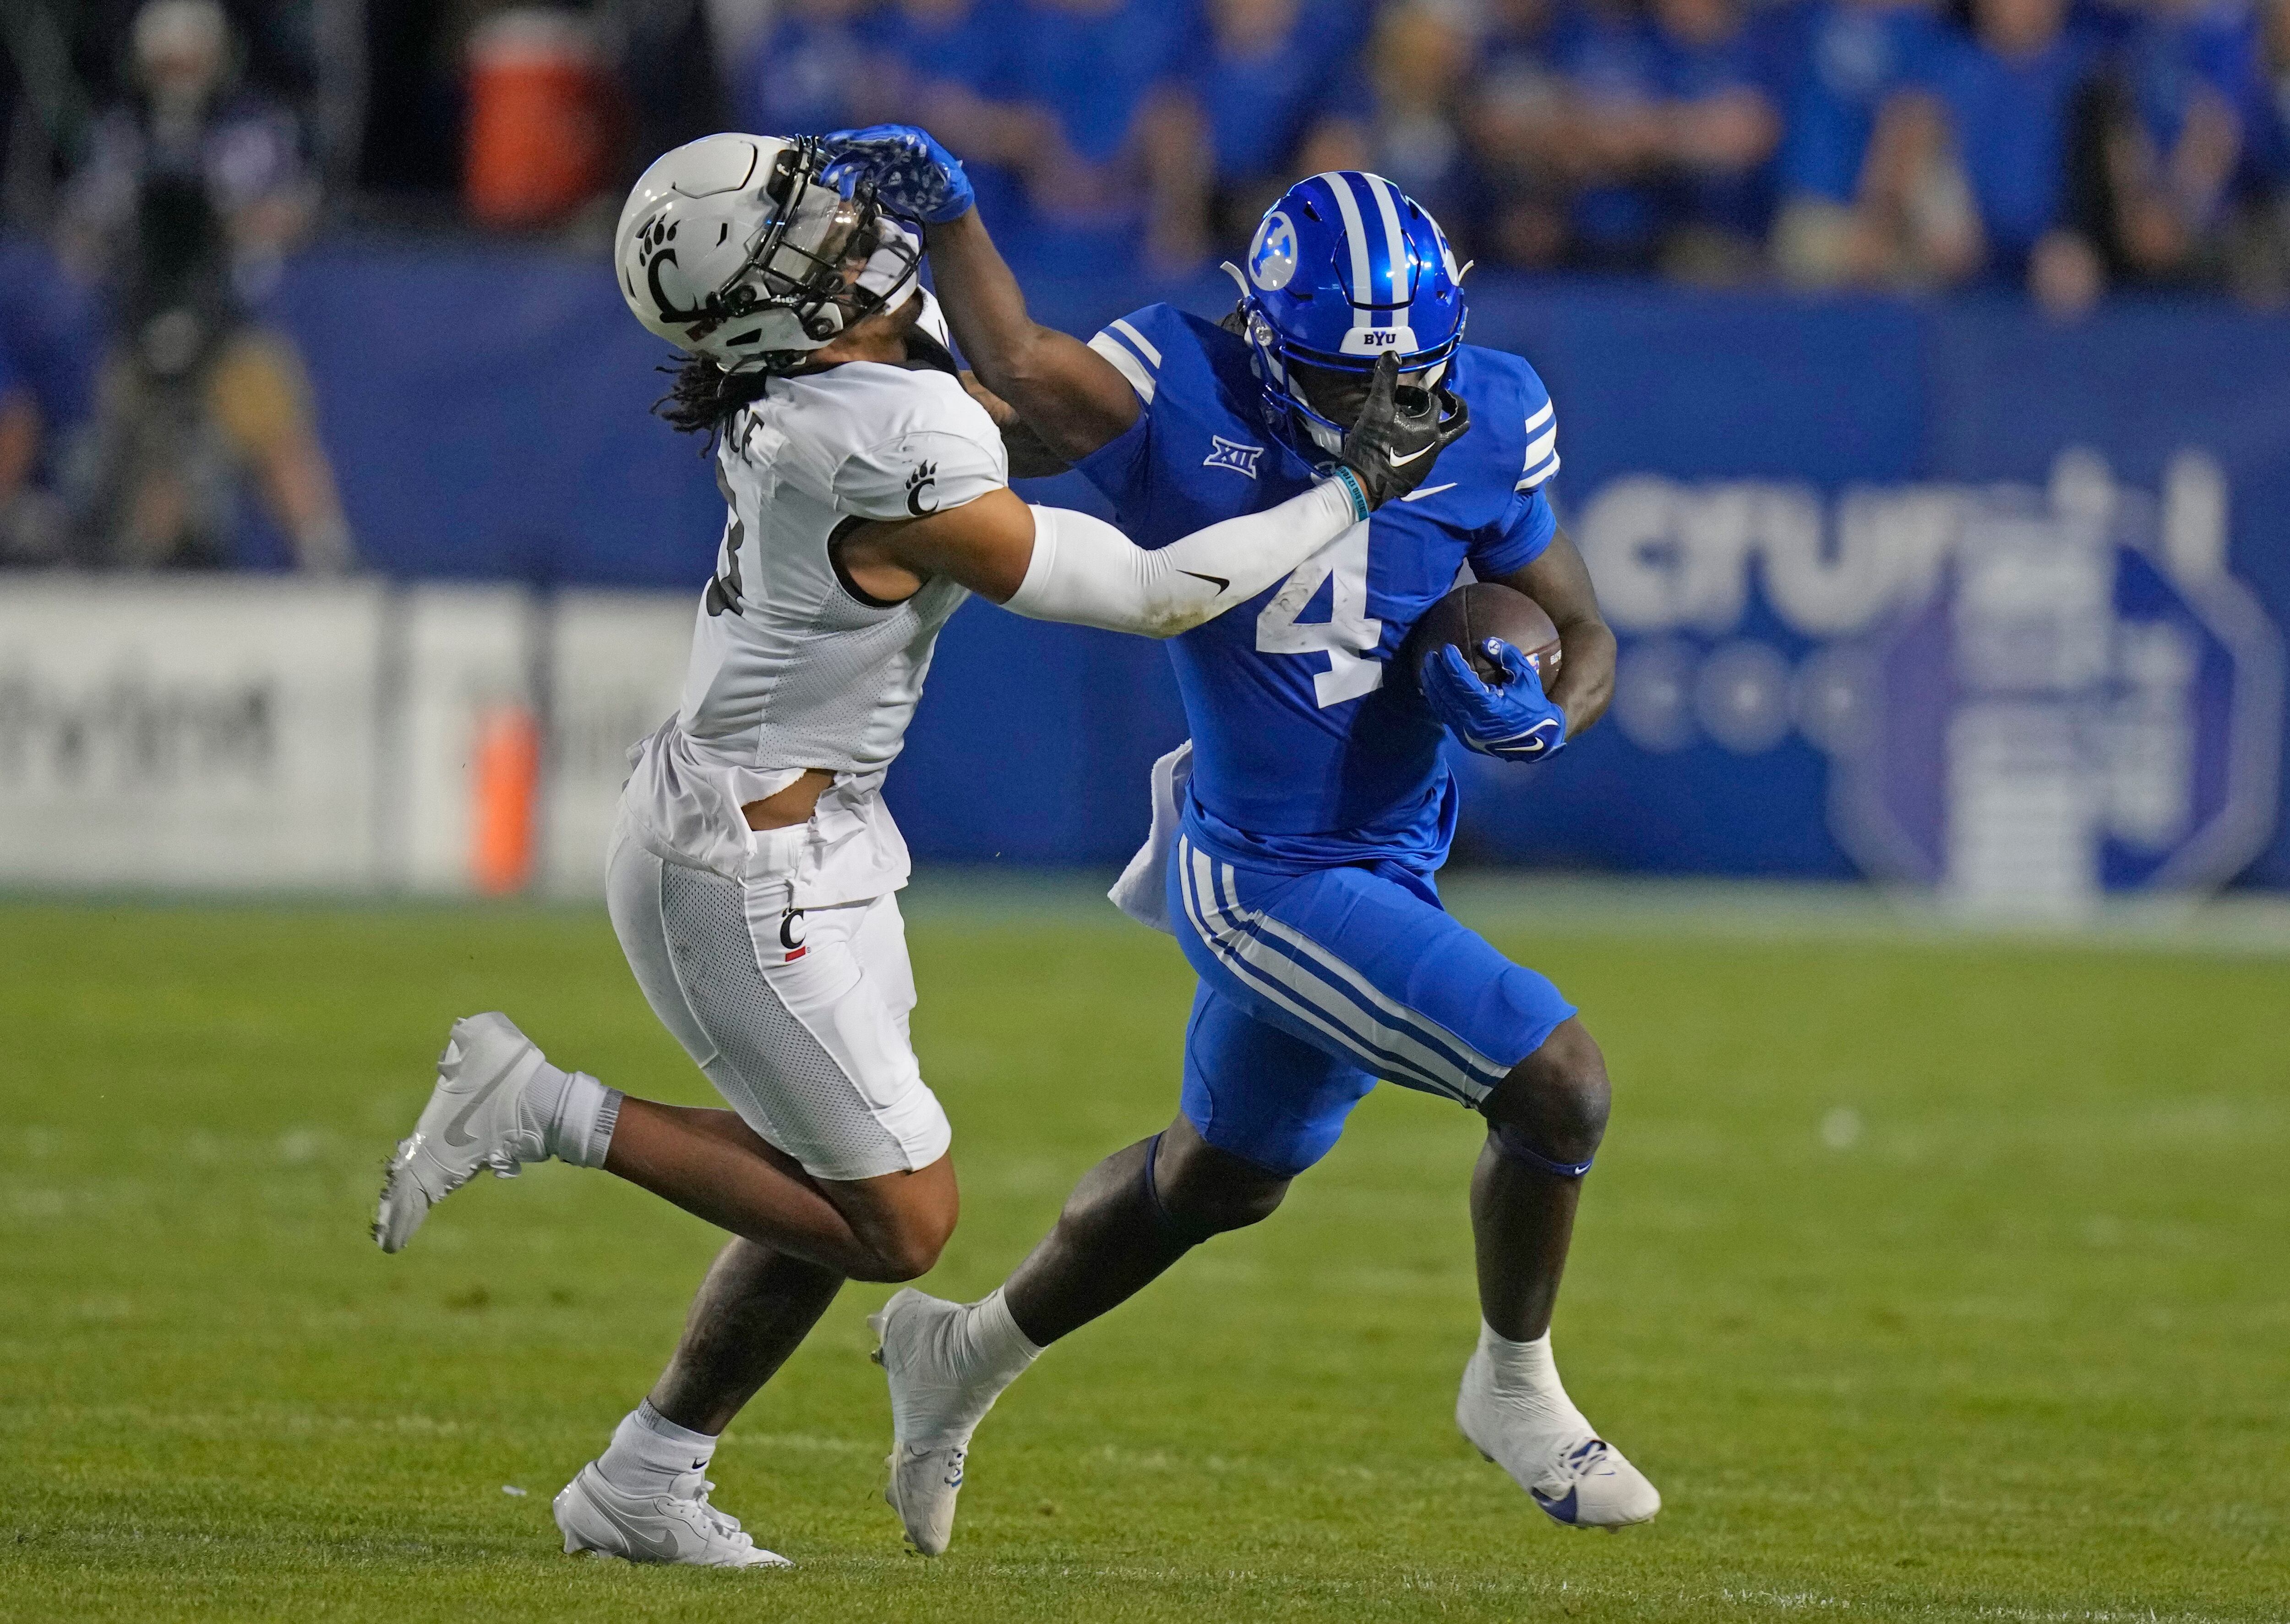 (Rick Bowmer | AP) BYU running back Miles Davis (4) stiff-arms Cincinnati safety Deshawn Pace during the first half of an NCAA college football game Friday, Sept. 29, 2023, in Provo.